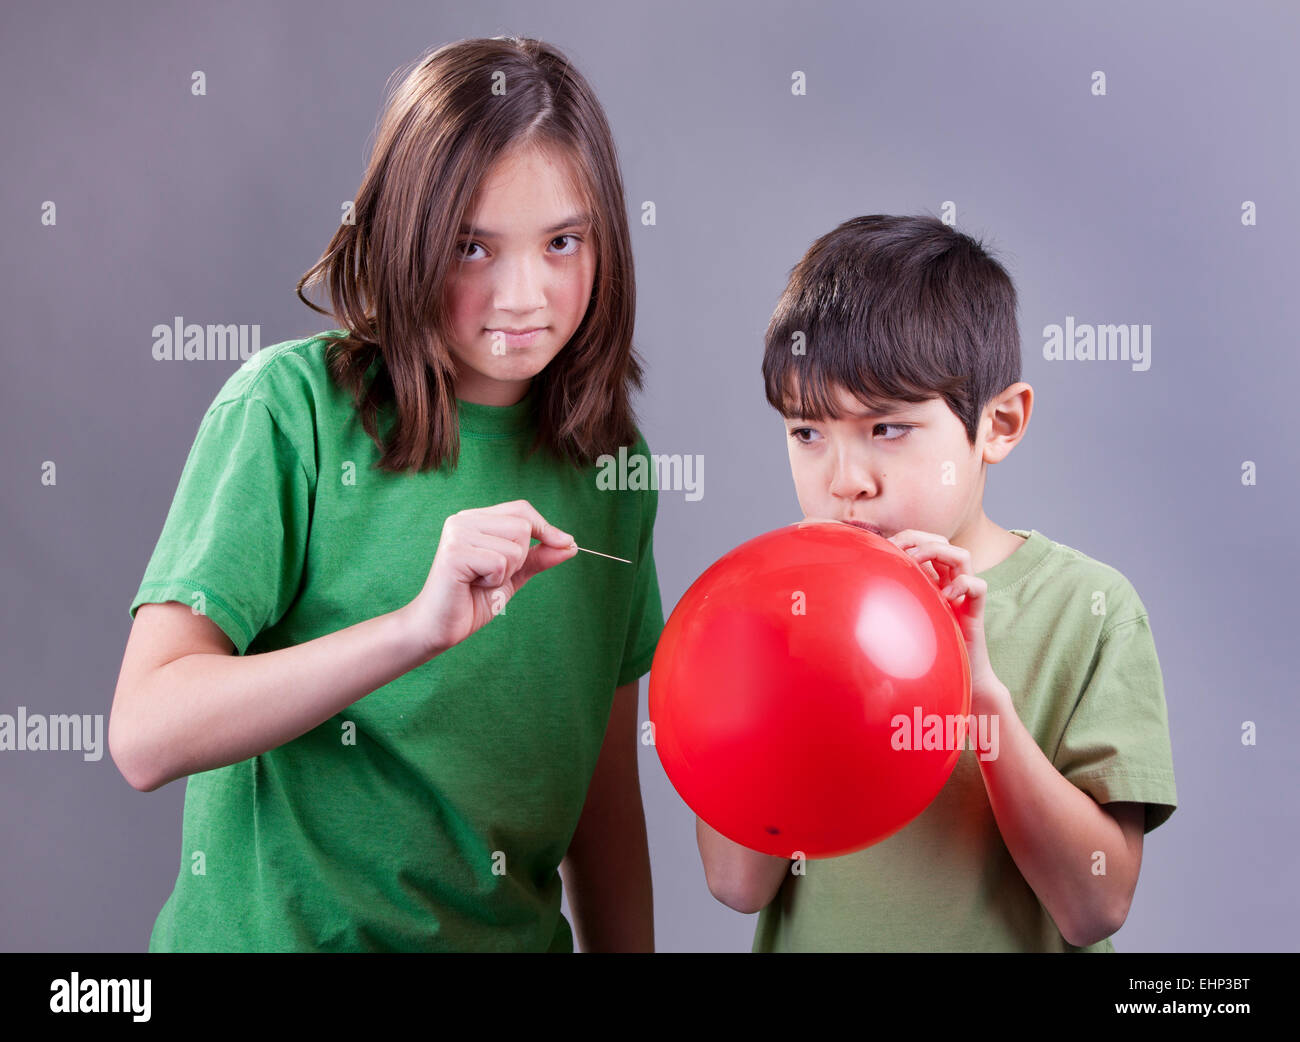 Popping brother's balloon. Stock Photo